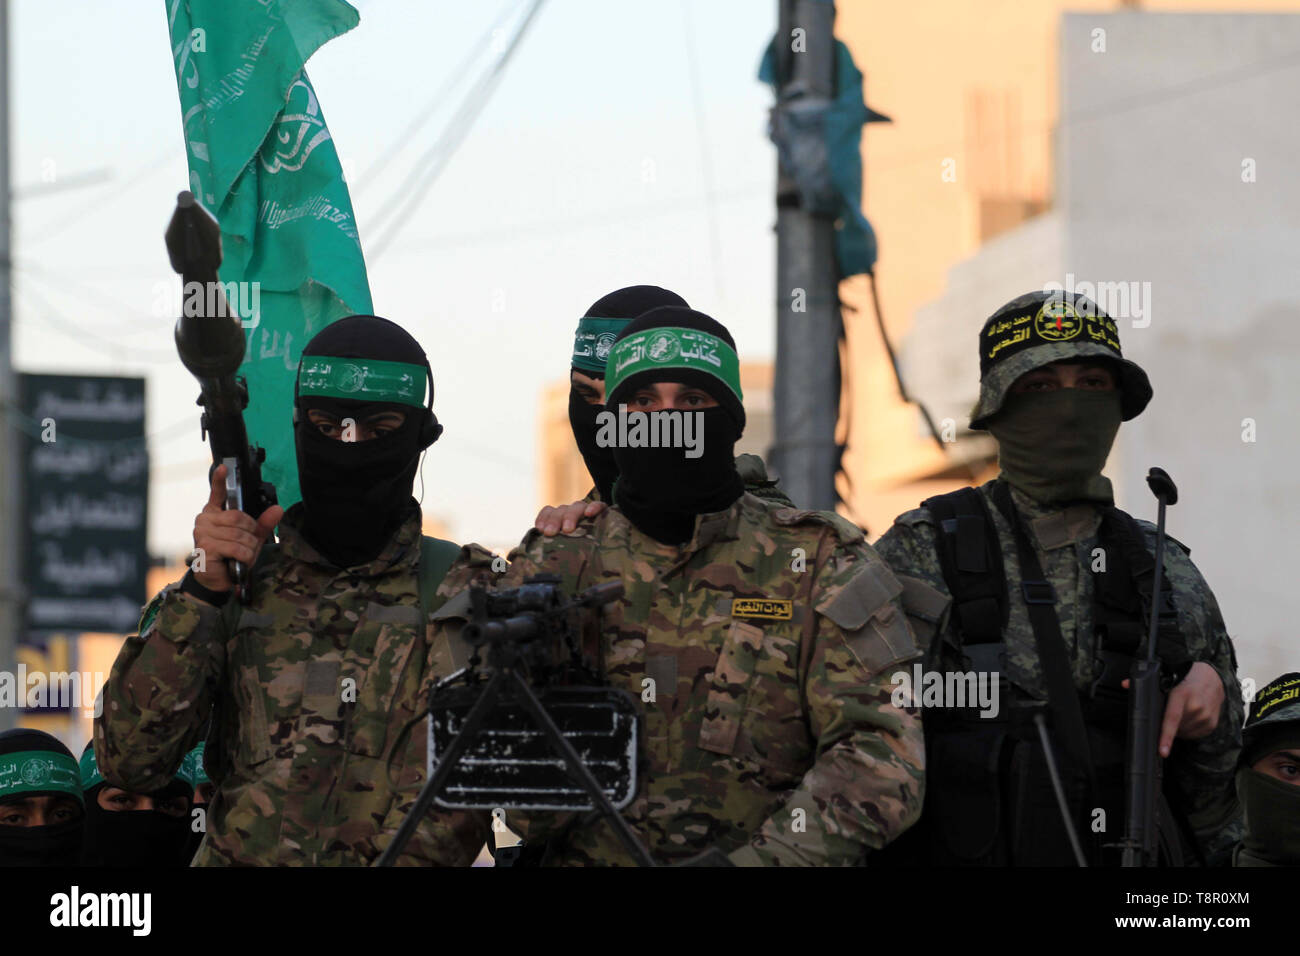 gaza-city-gaza-strip-palestinian-territory-14th-may-2019-palestinian-militants-of-ezzeddin-al-qassam-brigades-loyal-to-hamas-movement-and-al-quds-brigades-loyal-to-islamic-jihad-movement-patrol-in-a-street-in-gaza-city-on-may-14-2019-qatar-will-continue-its-humanitarian-aid-to-the-gaza-strip-for-another-six-months-including-paying-for-electricity-and-helping-poor-families-a-senior-qatari-official-announced-on-tuesday-credit-mahmoud-khattabapa-imageszuma-wirealamy-live-news-T8R0XM.jpg